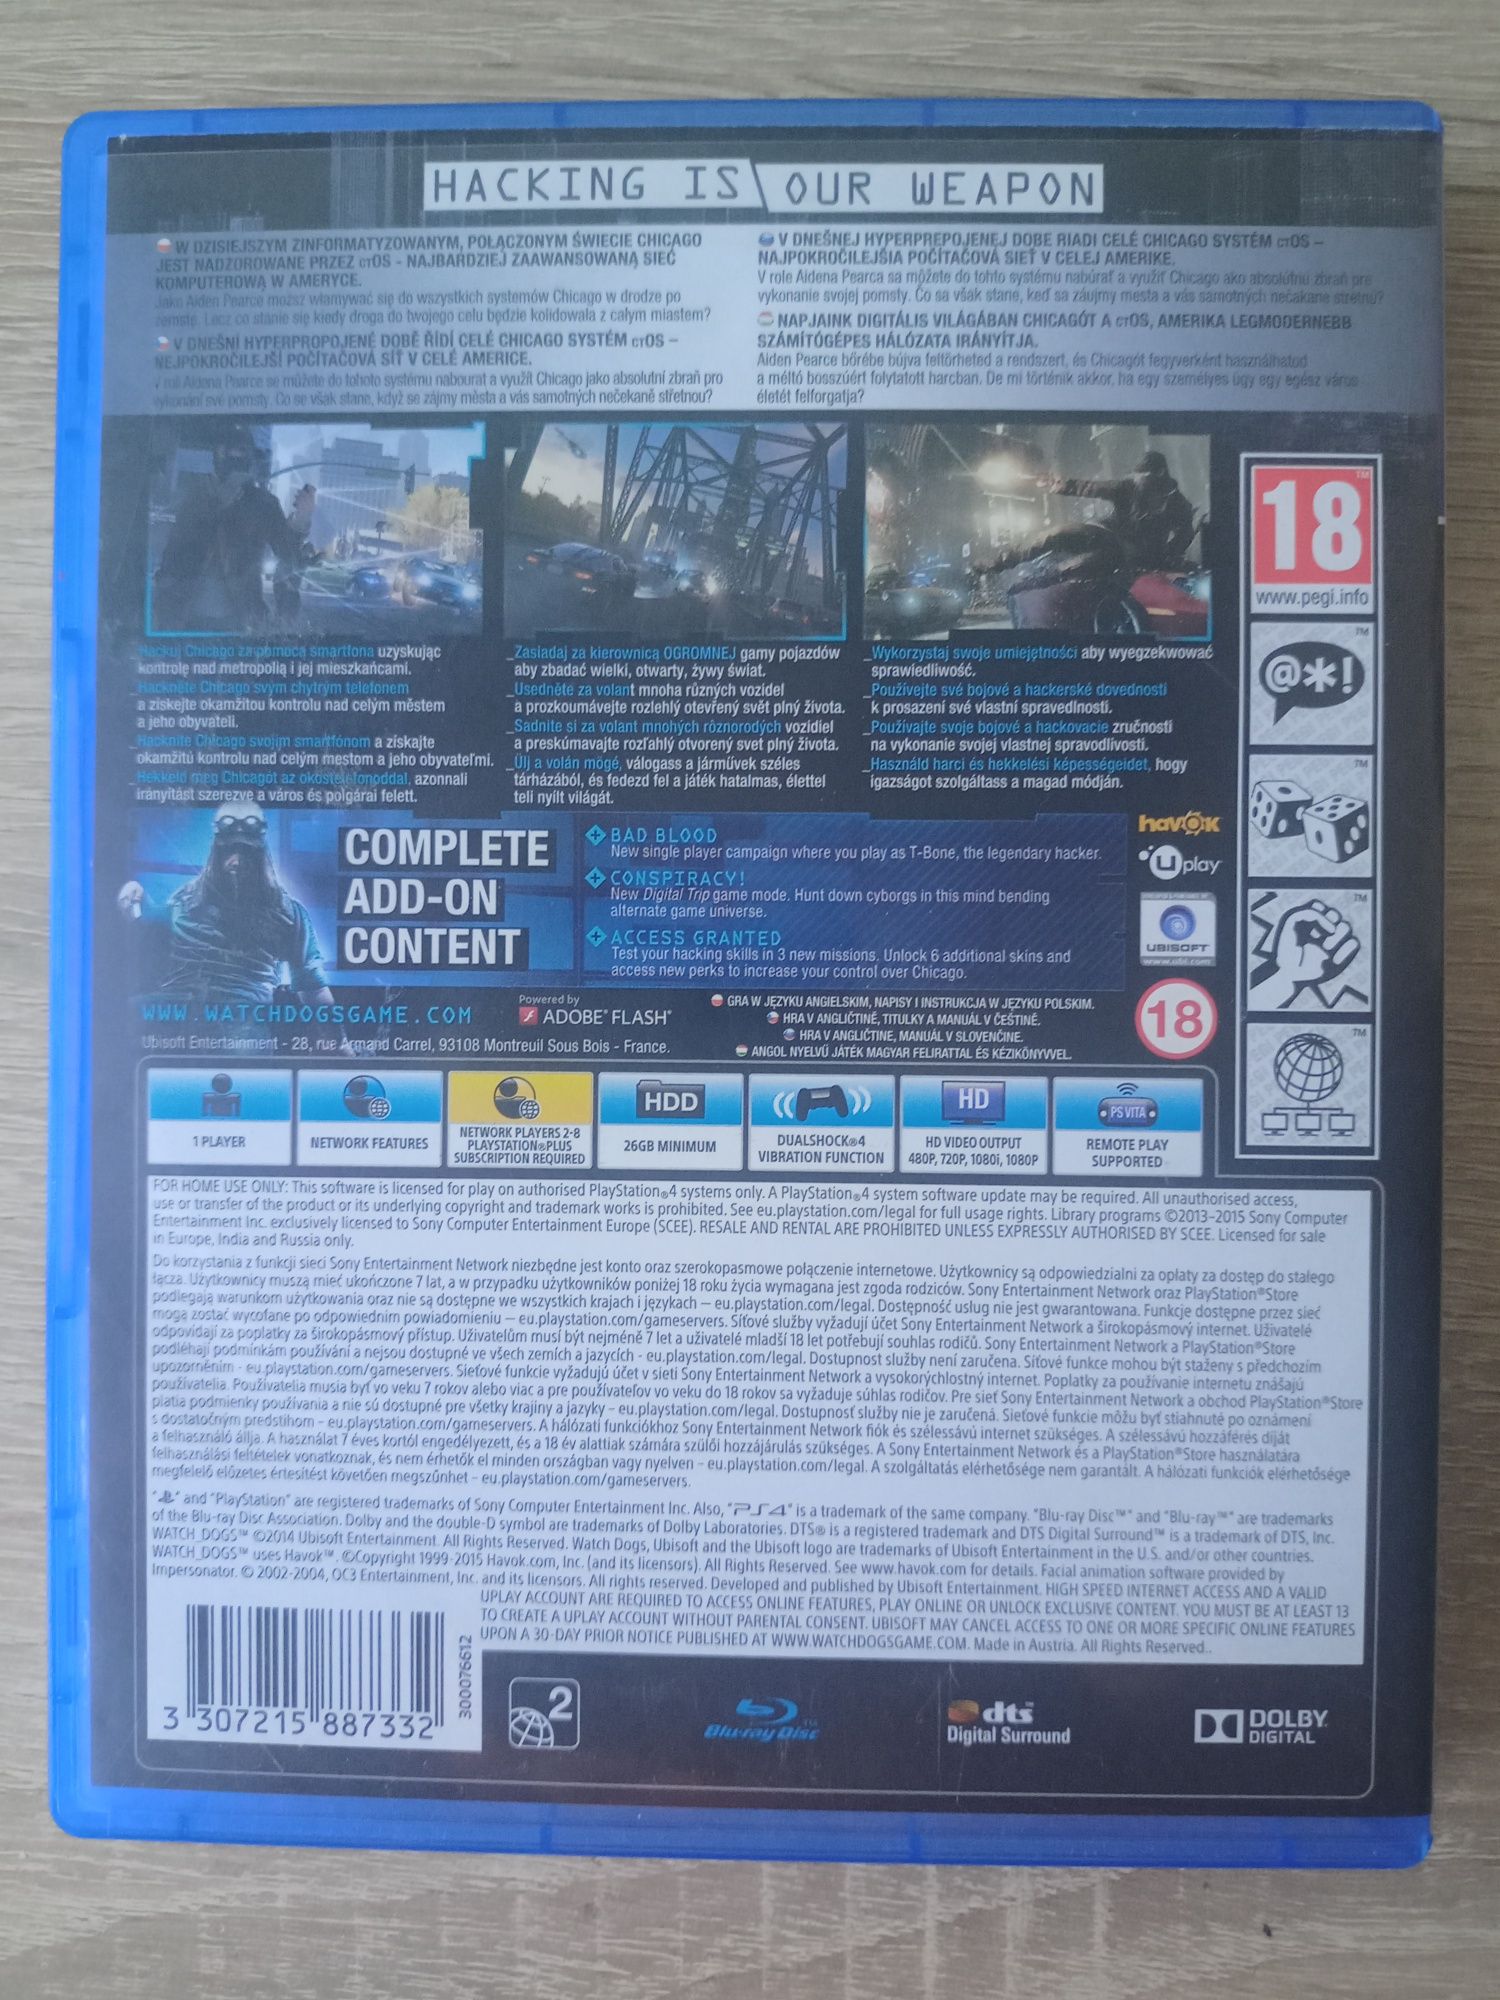 Gra Watch Dogs Complete Edition PS4